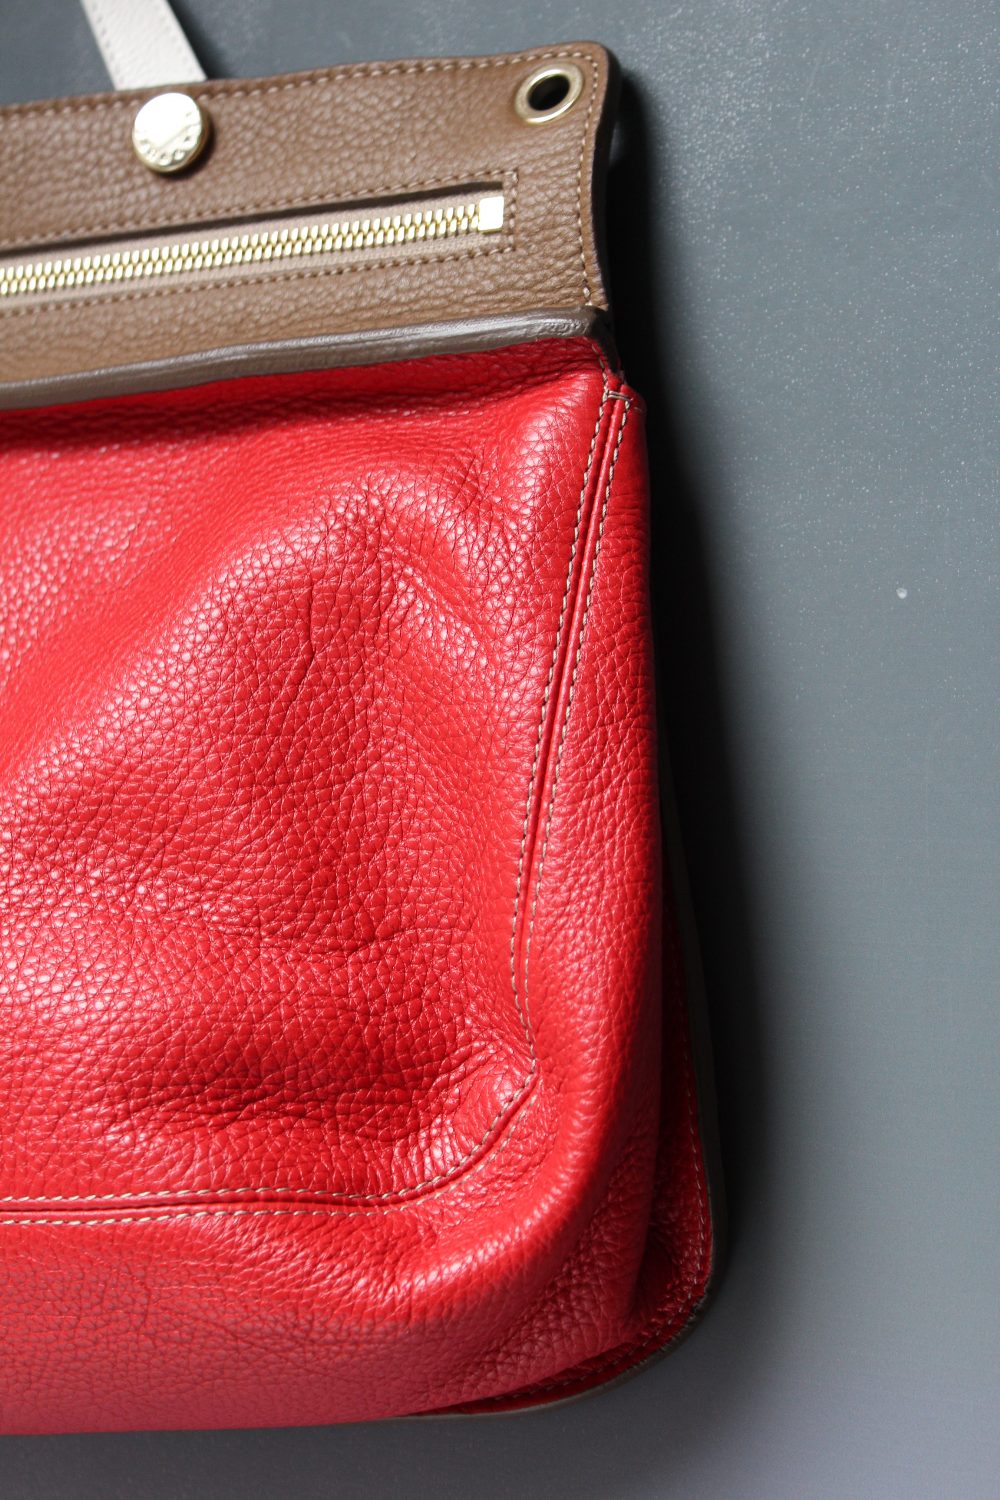 A FURLA SATCHEL STYLE HANDBAG WITH ADDITIONAL SHOULDER STRAP, red leather with cream and brown - Image 4 of 6